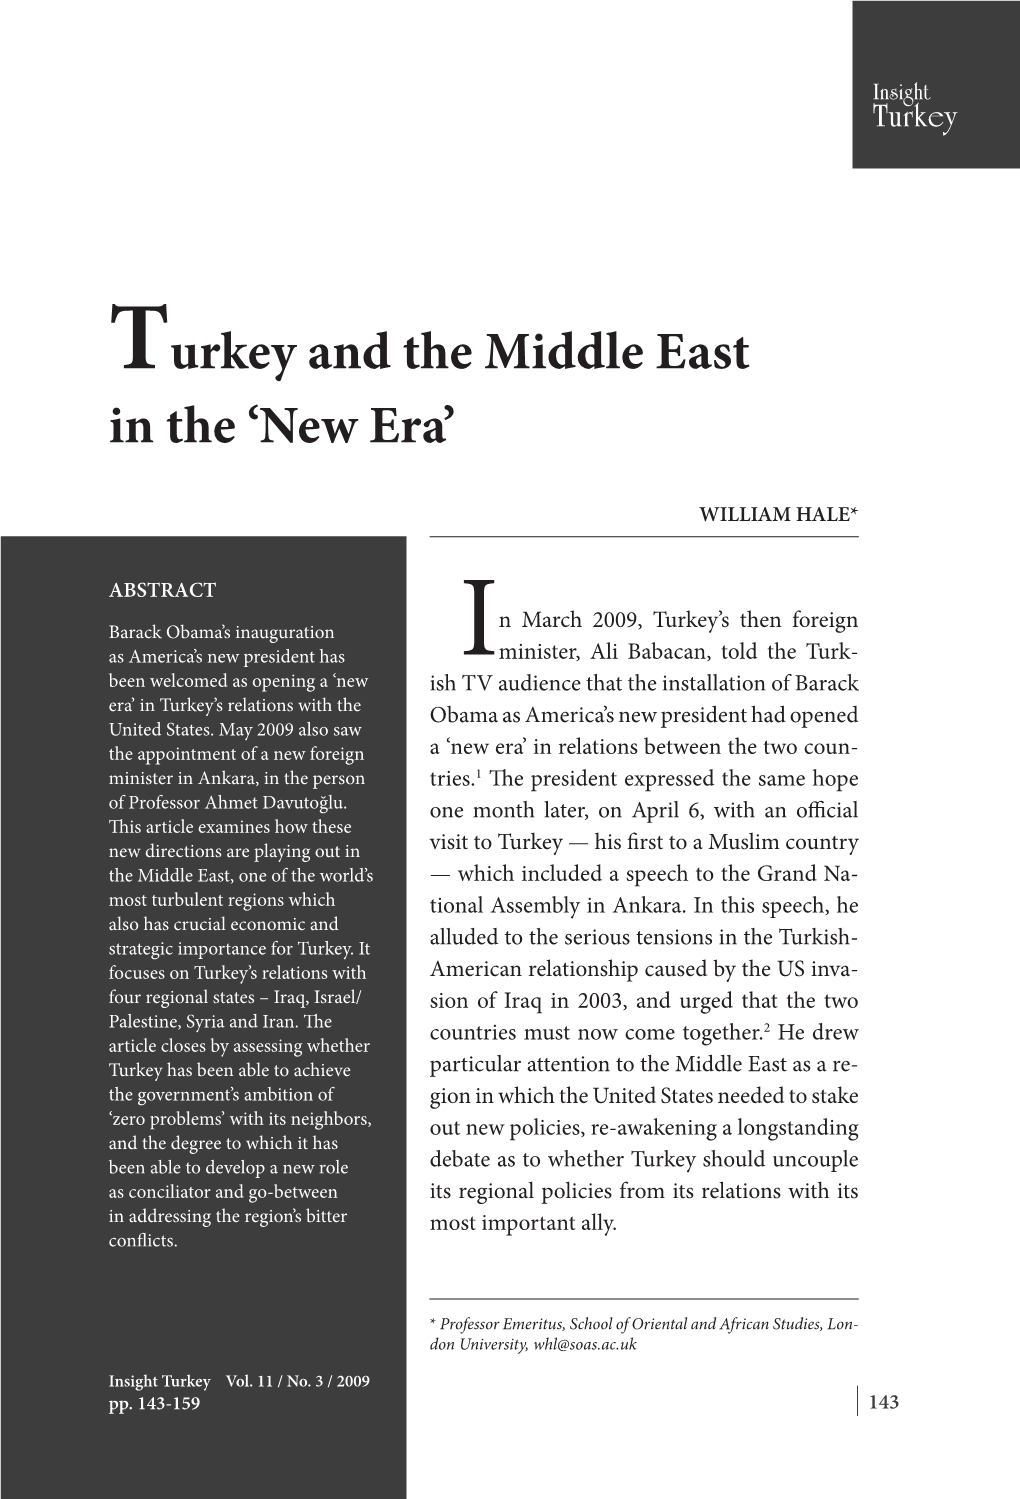 Turkey and the Middle East in the 'New Era'